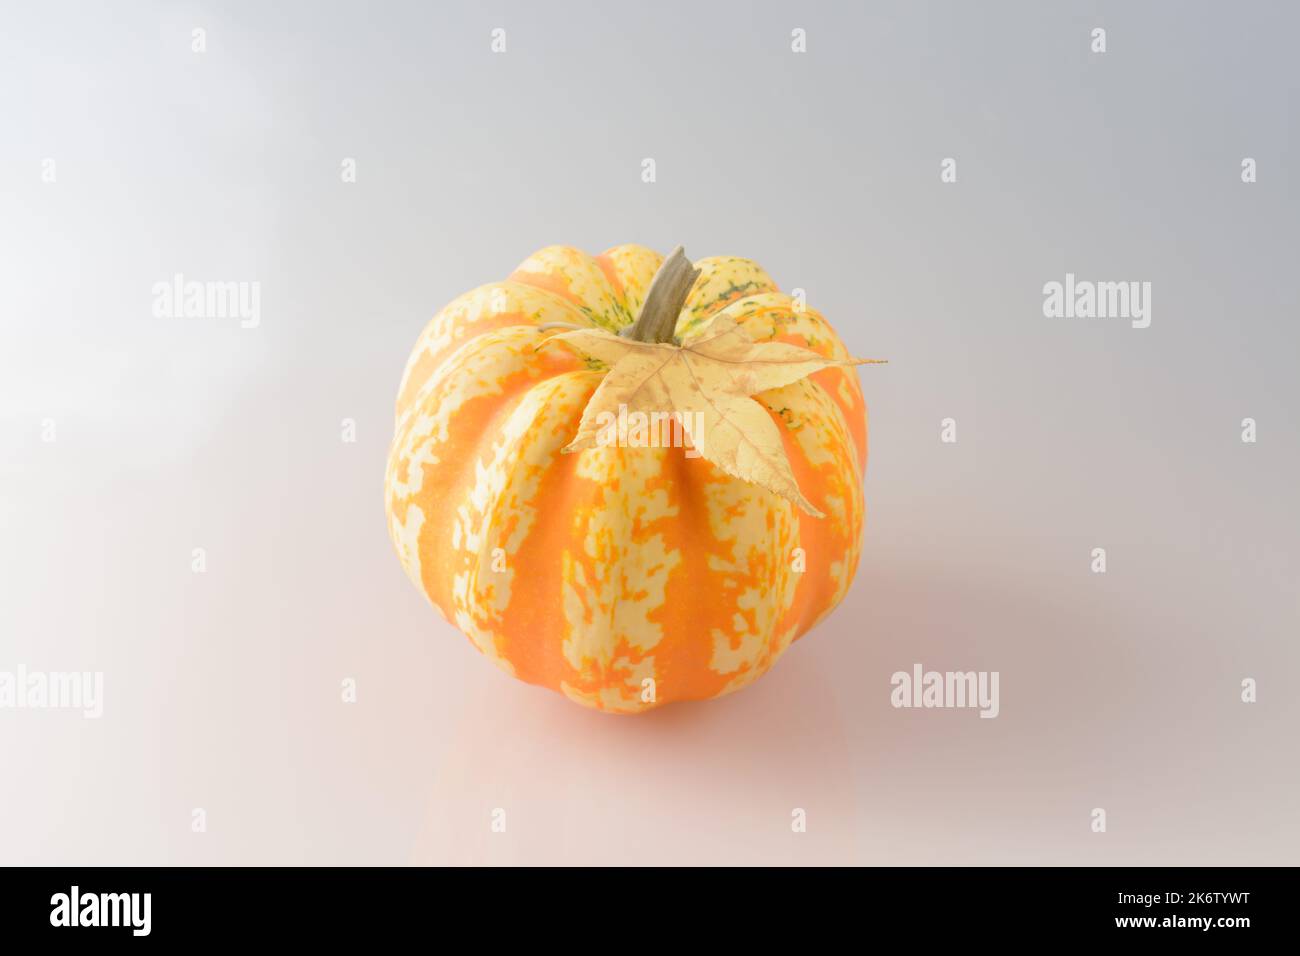 Striped orange round pumpkin with a maple leaf on a light background in a horizontal format Stock Photo